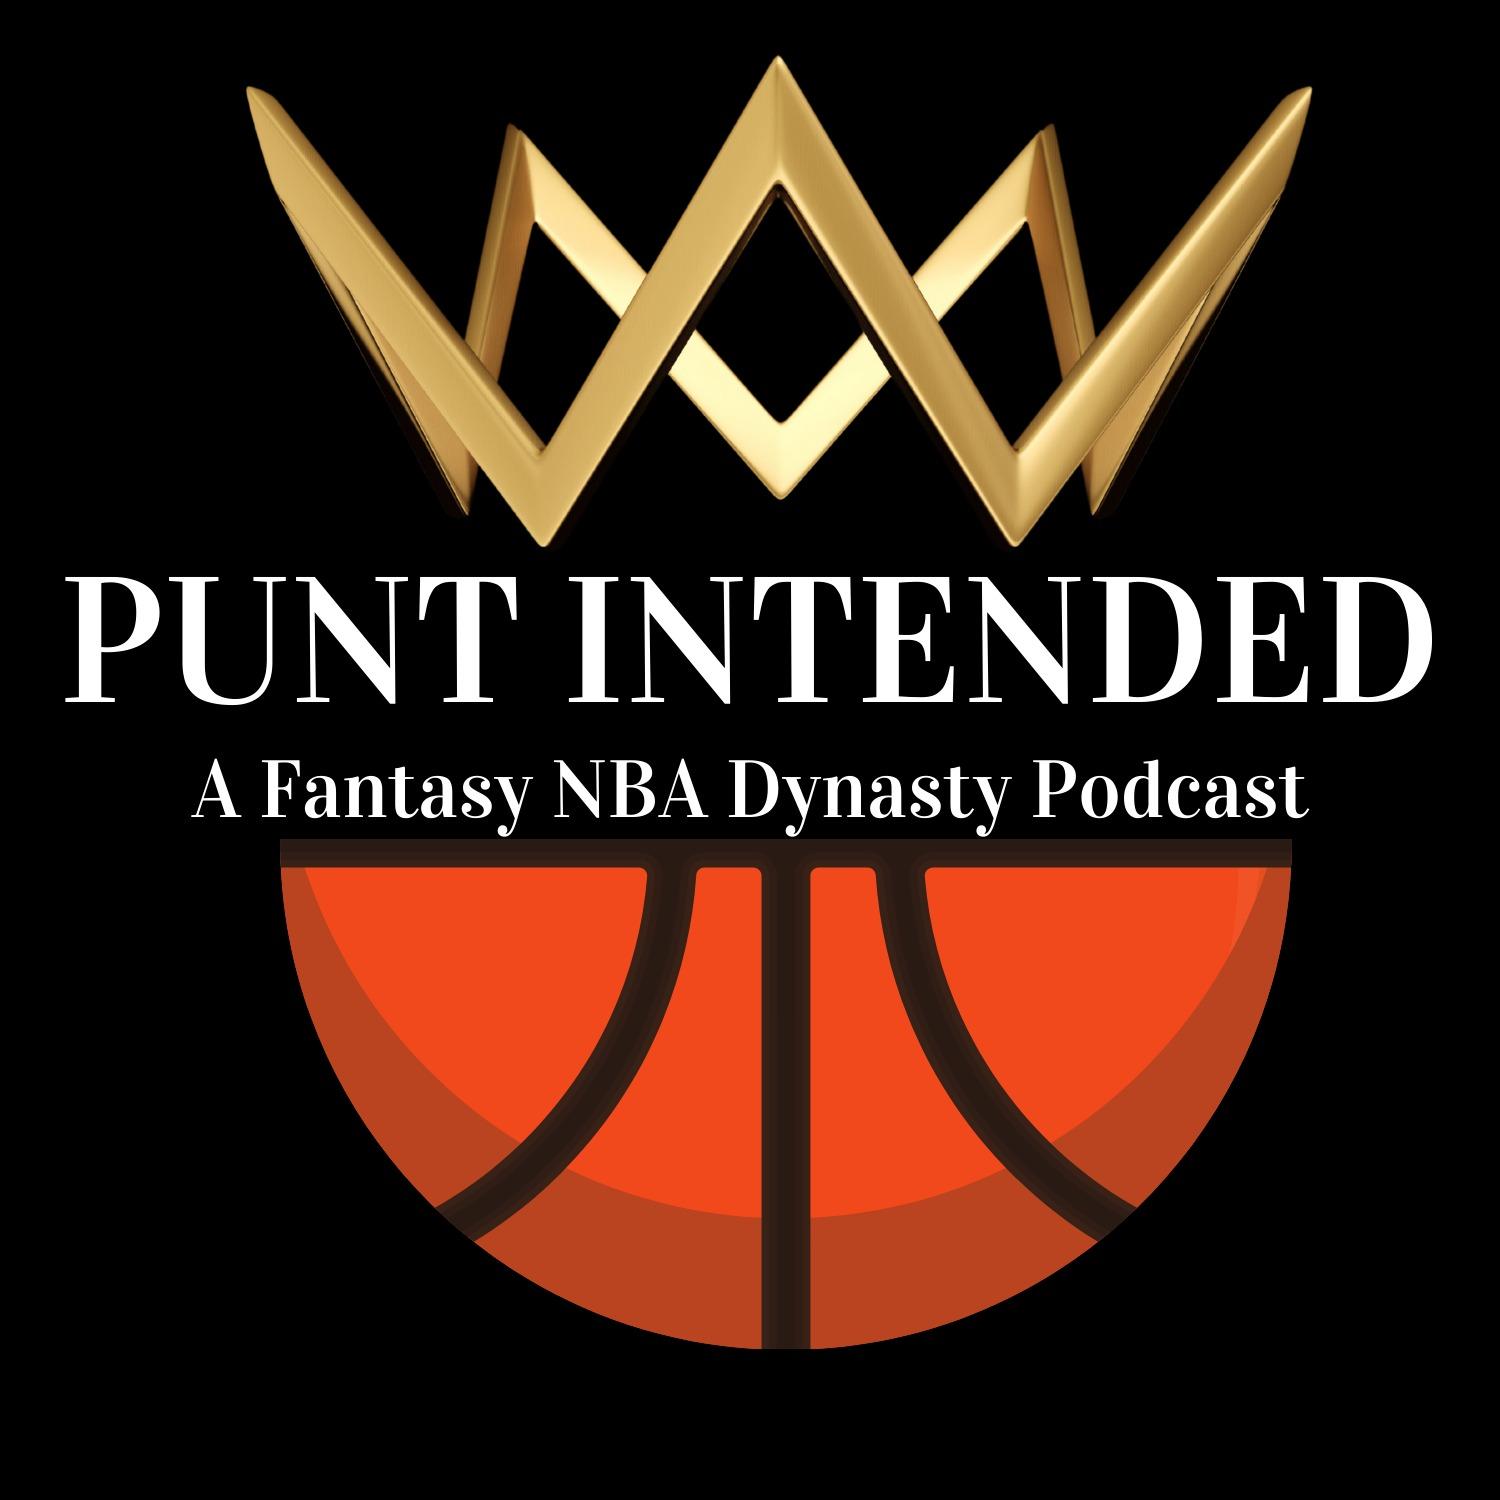 Punt Intended: A Fantasy NBA Dynasty Podcast